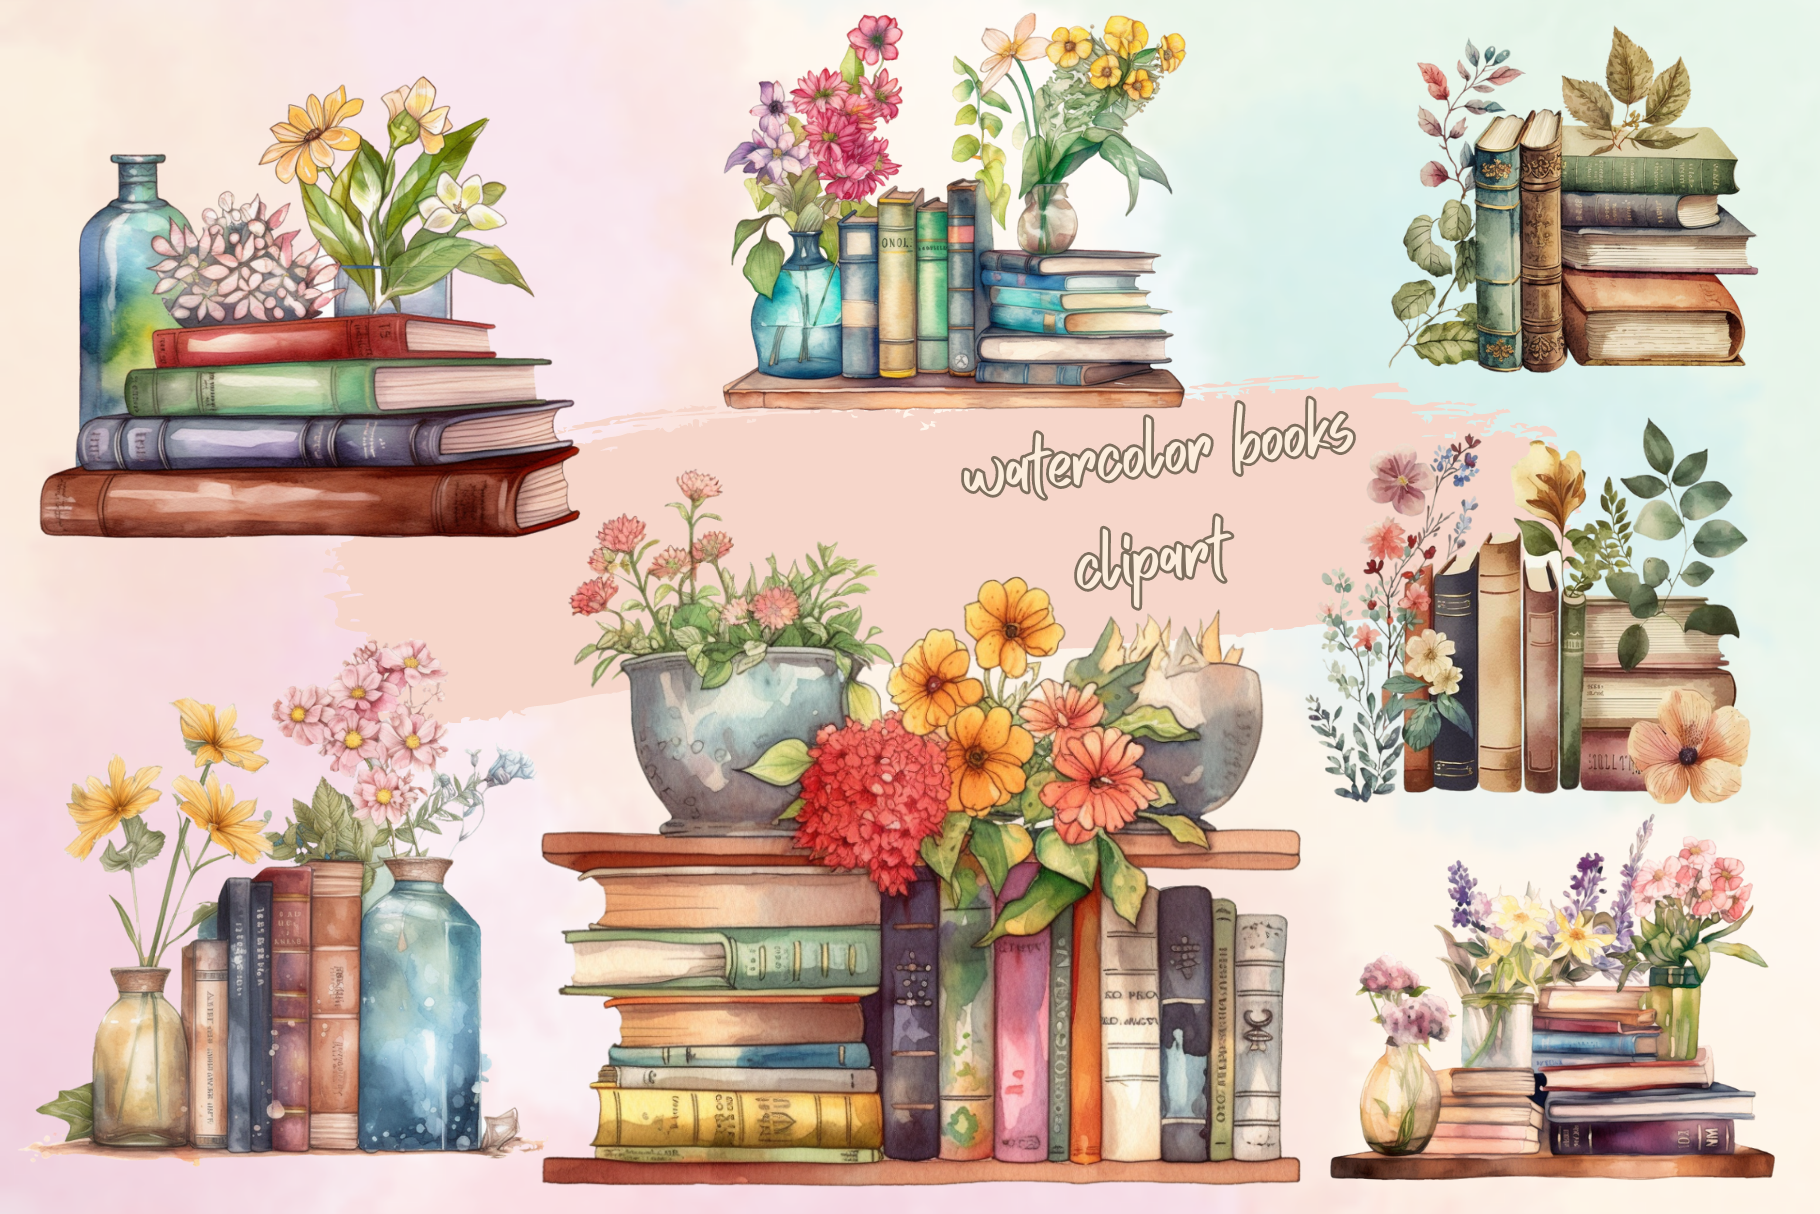 Vintage Floral Stack of Books Sticker Graphic by Digital Xpress